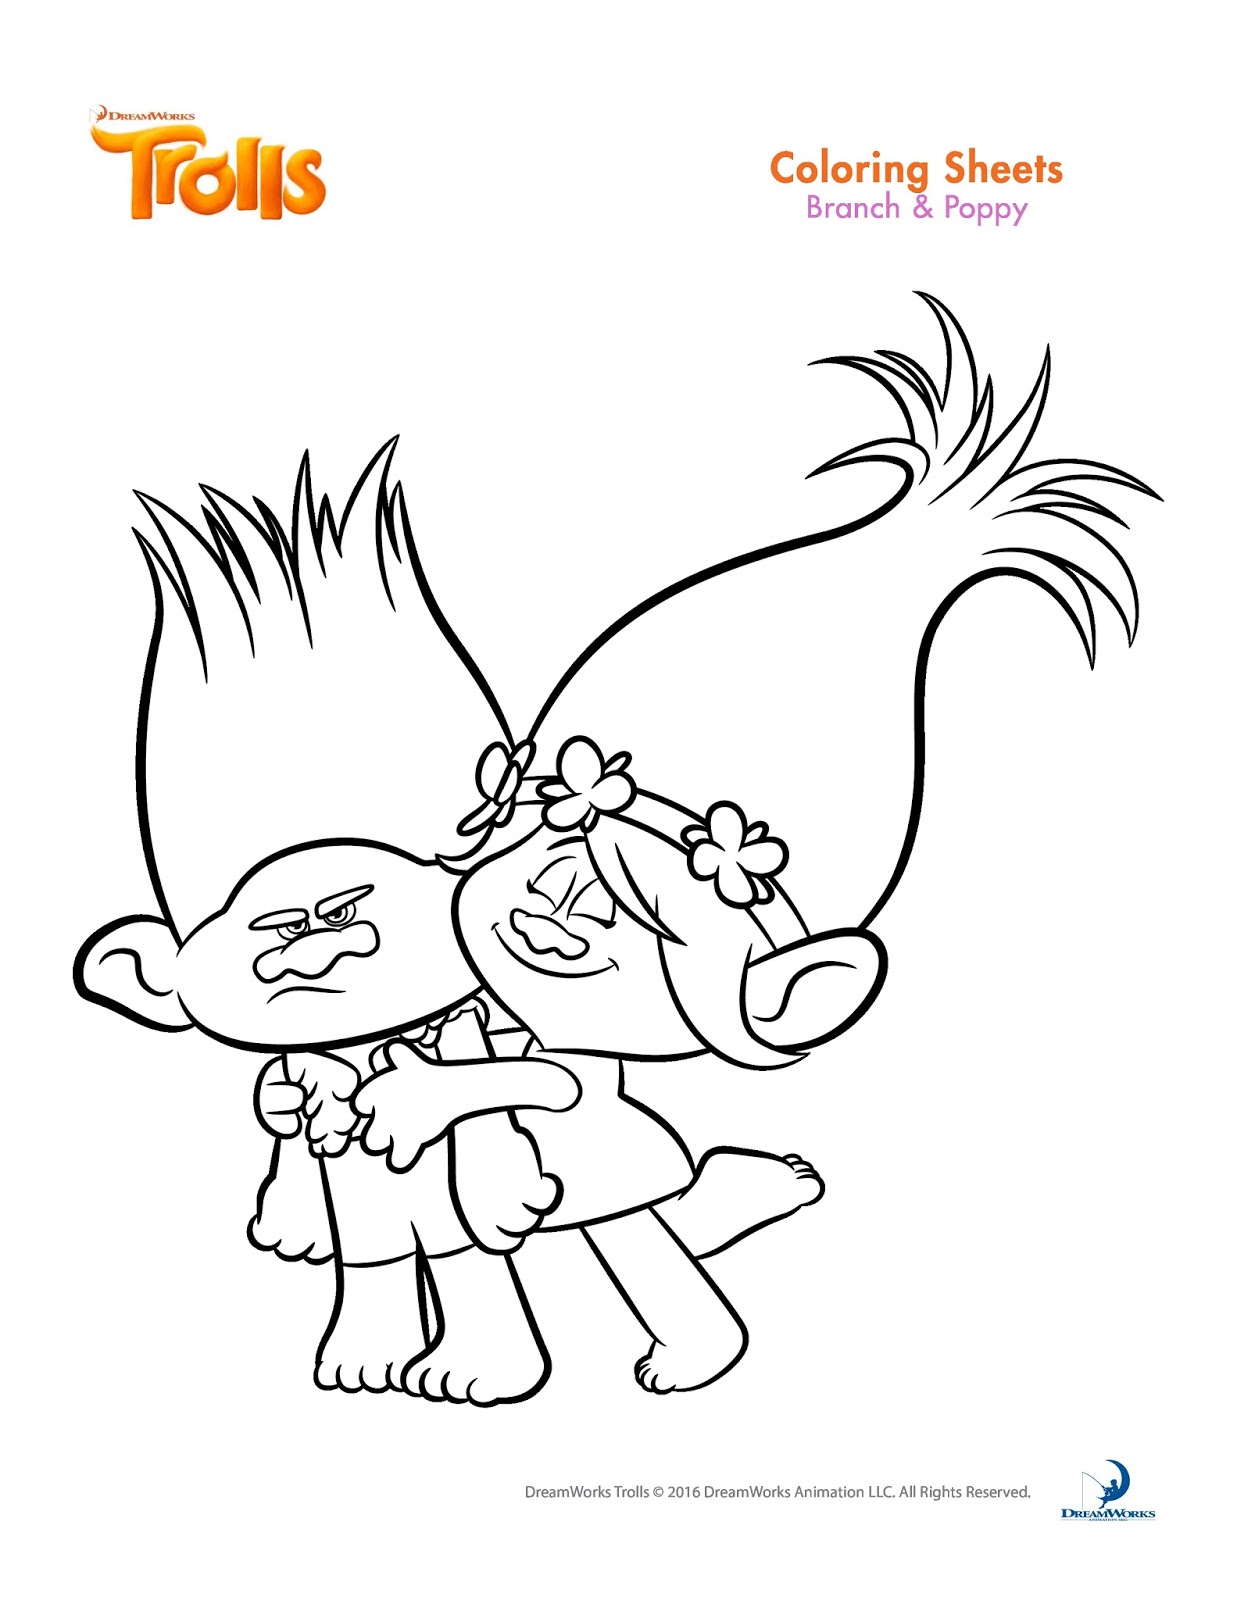 Free Trolls Movie Coloring Pages Download Free Clip Art Free Clip Art On Clipart Library